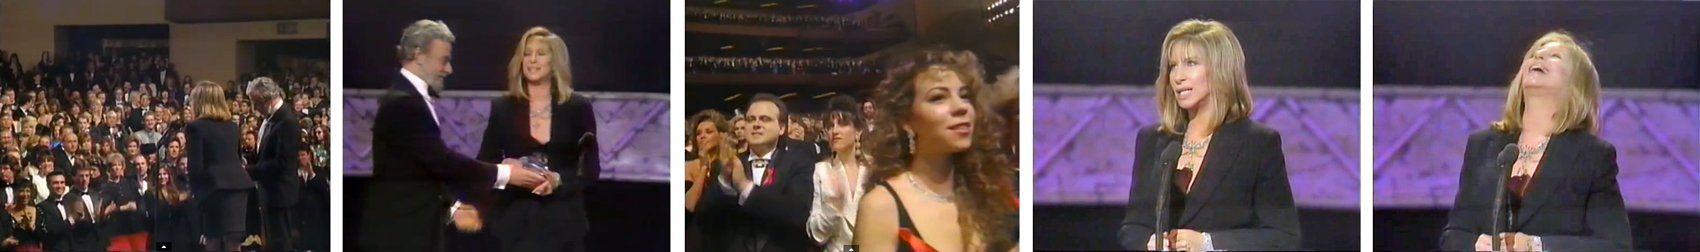 Scenes from the 1992 Grammys of Barbra accepted her award.